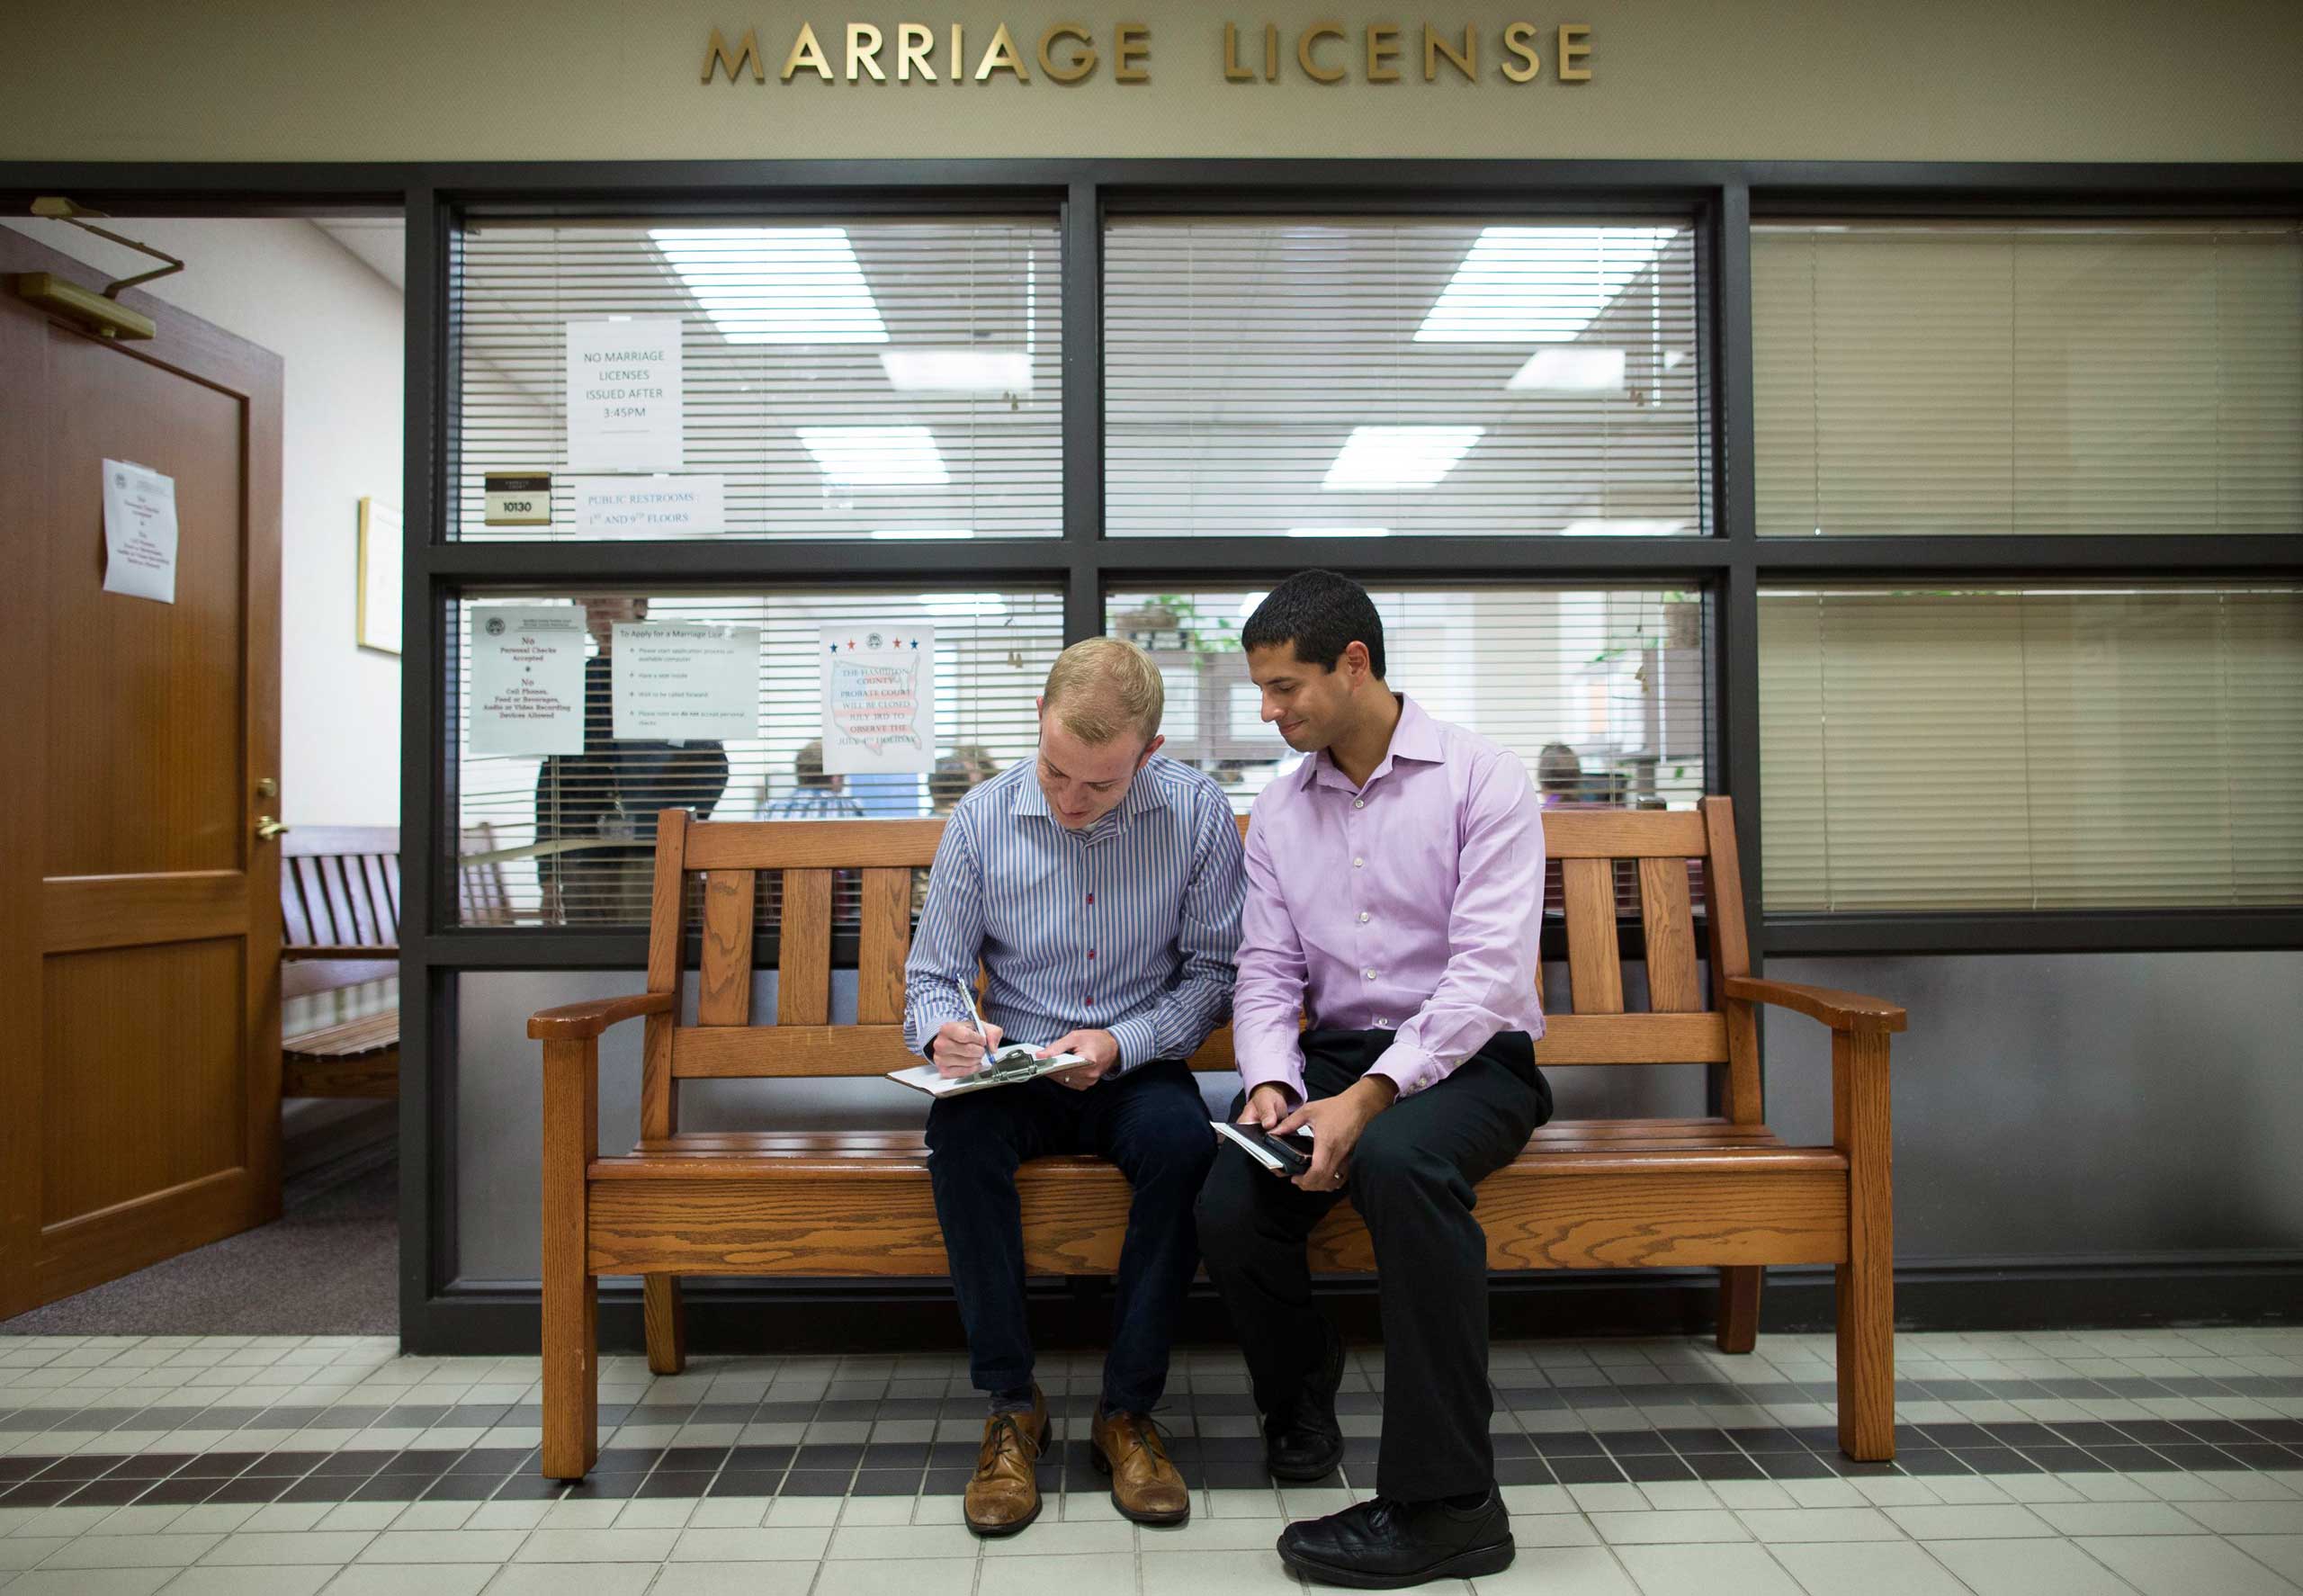 Ethan Fletcher, left, and Andrew Hickam fill out their marriage paperwork at Hamilton County Probate Court in Cincinnati on June 26, 2015.